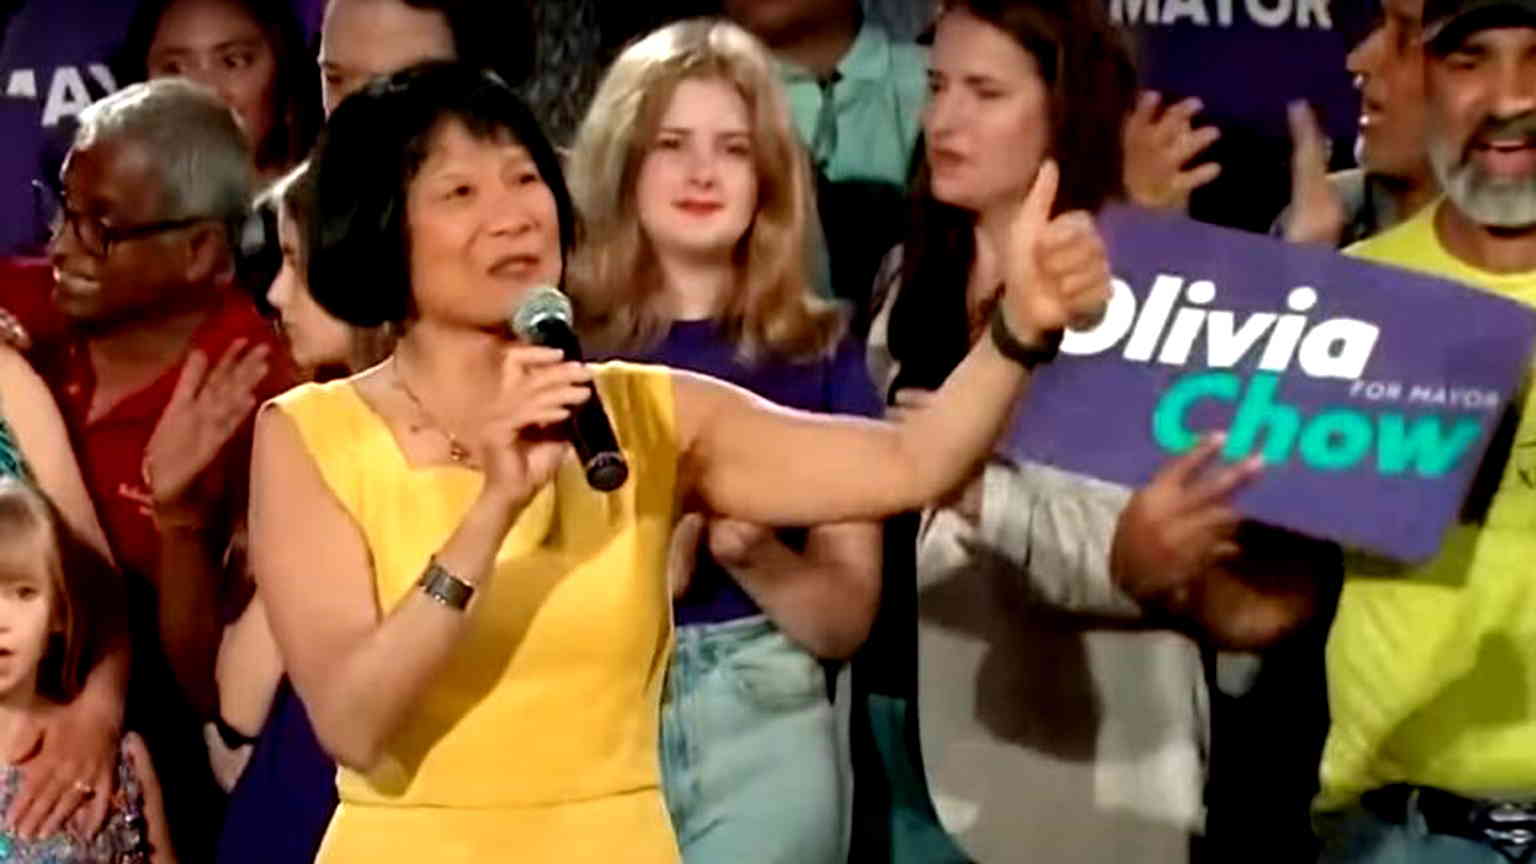 Olivia Chow elected as Toronto’s first Chinese Canadian mayor